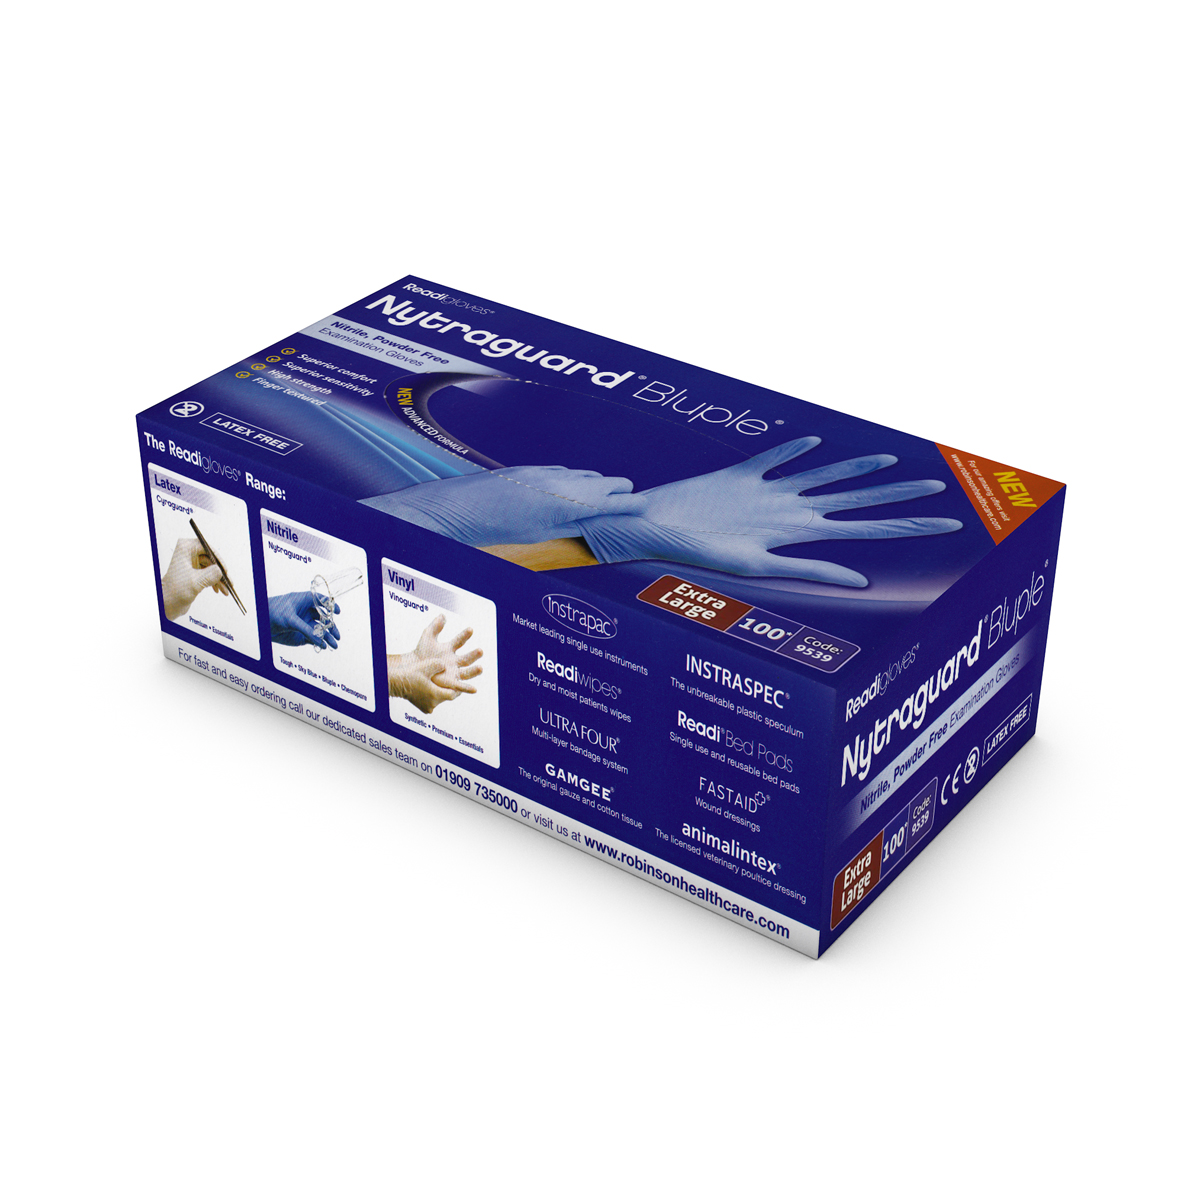 Bluple Nytraguard medical gloves. size: X large. Box of 100 (temp out of stock)